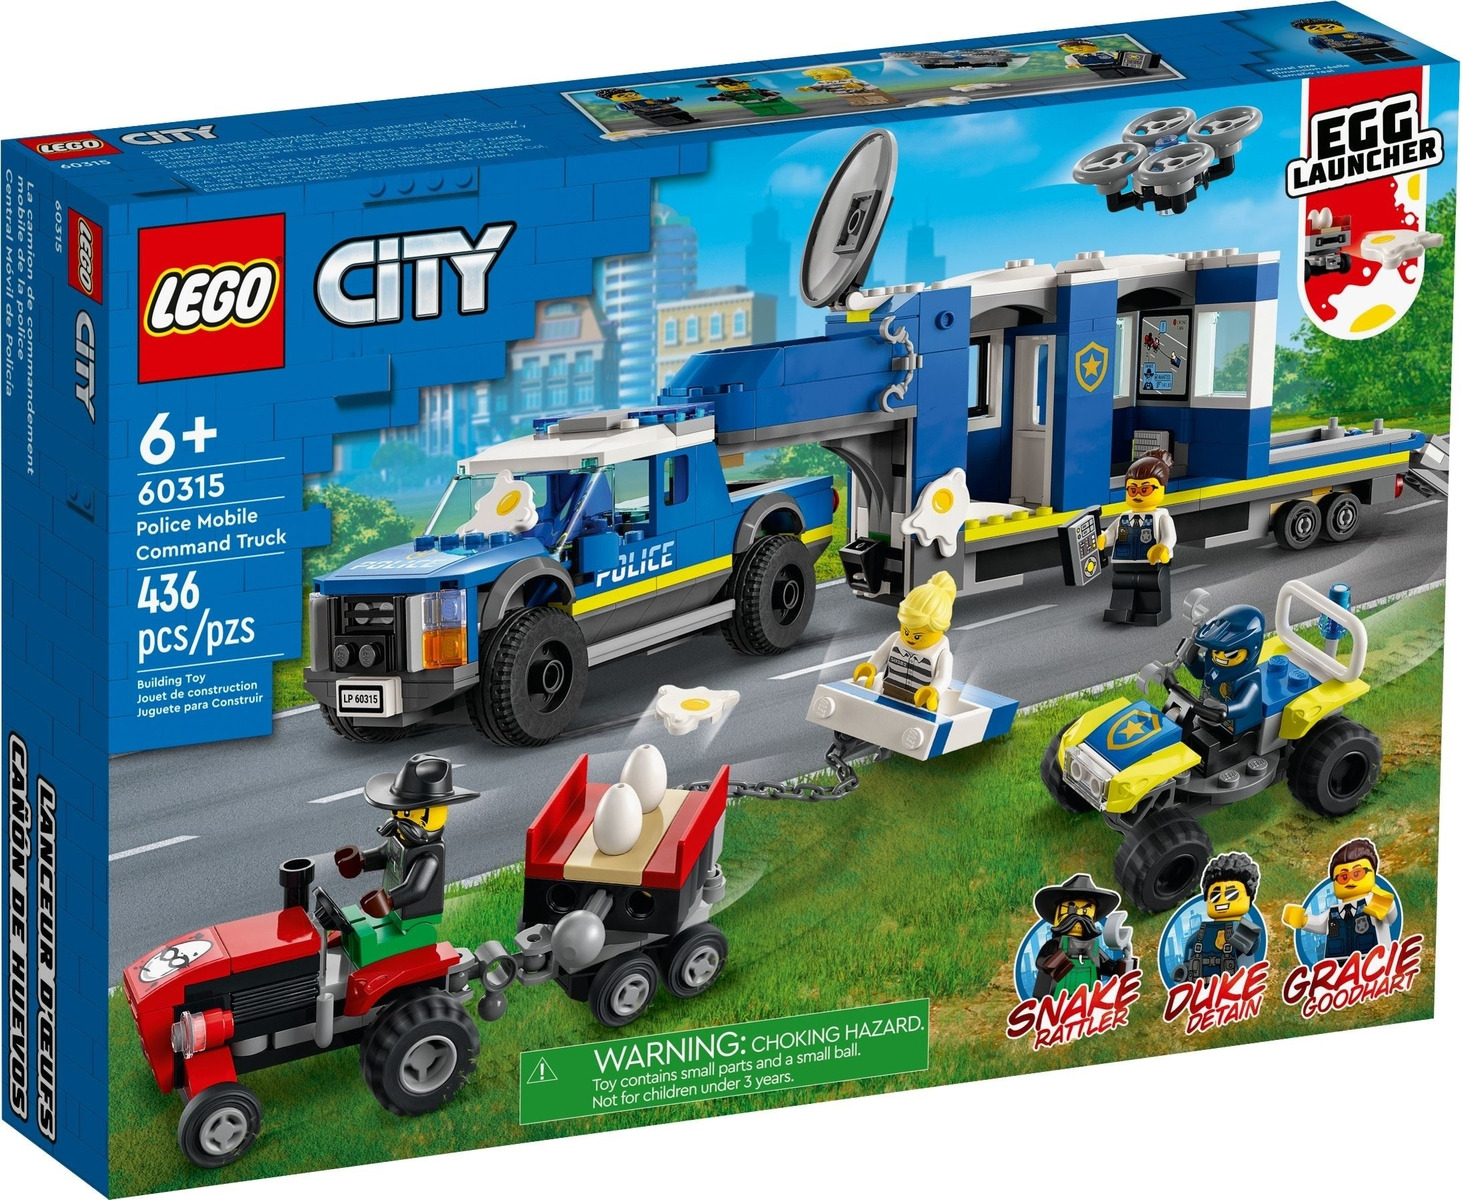 NEW LEGO 60315 City Police Mobile Command Truck